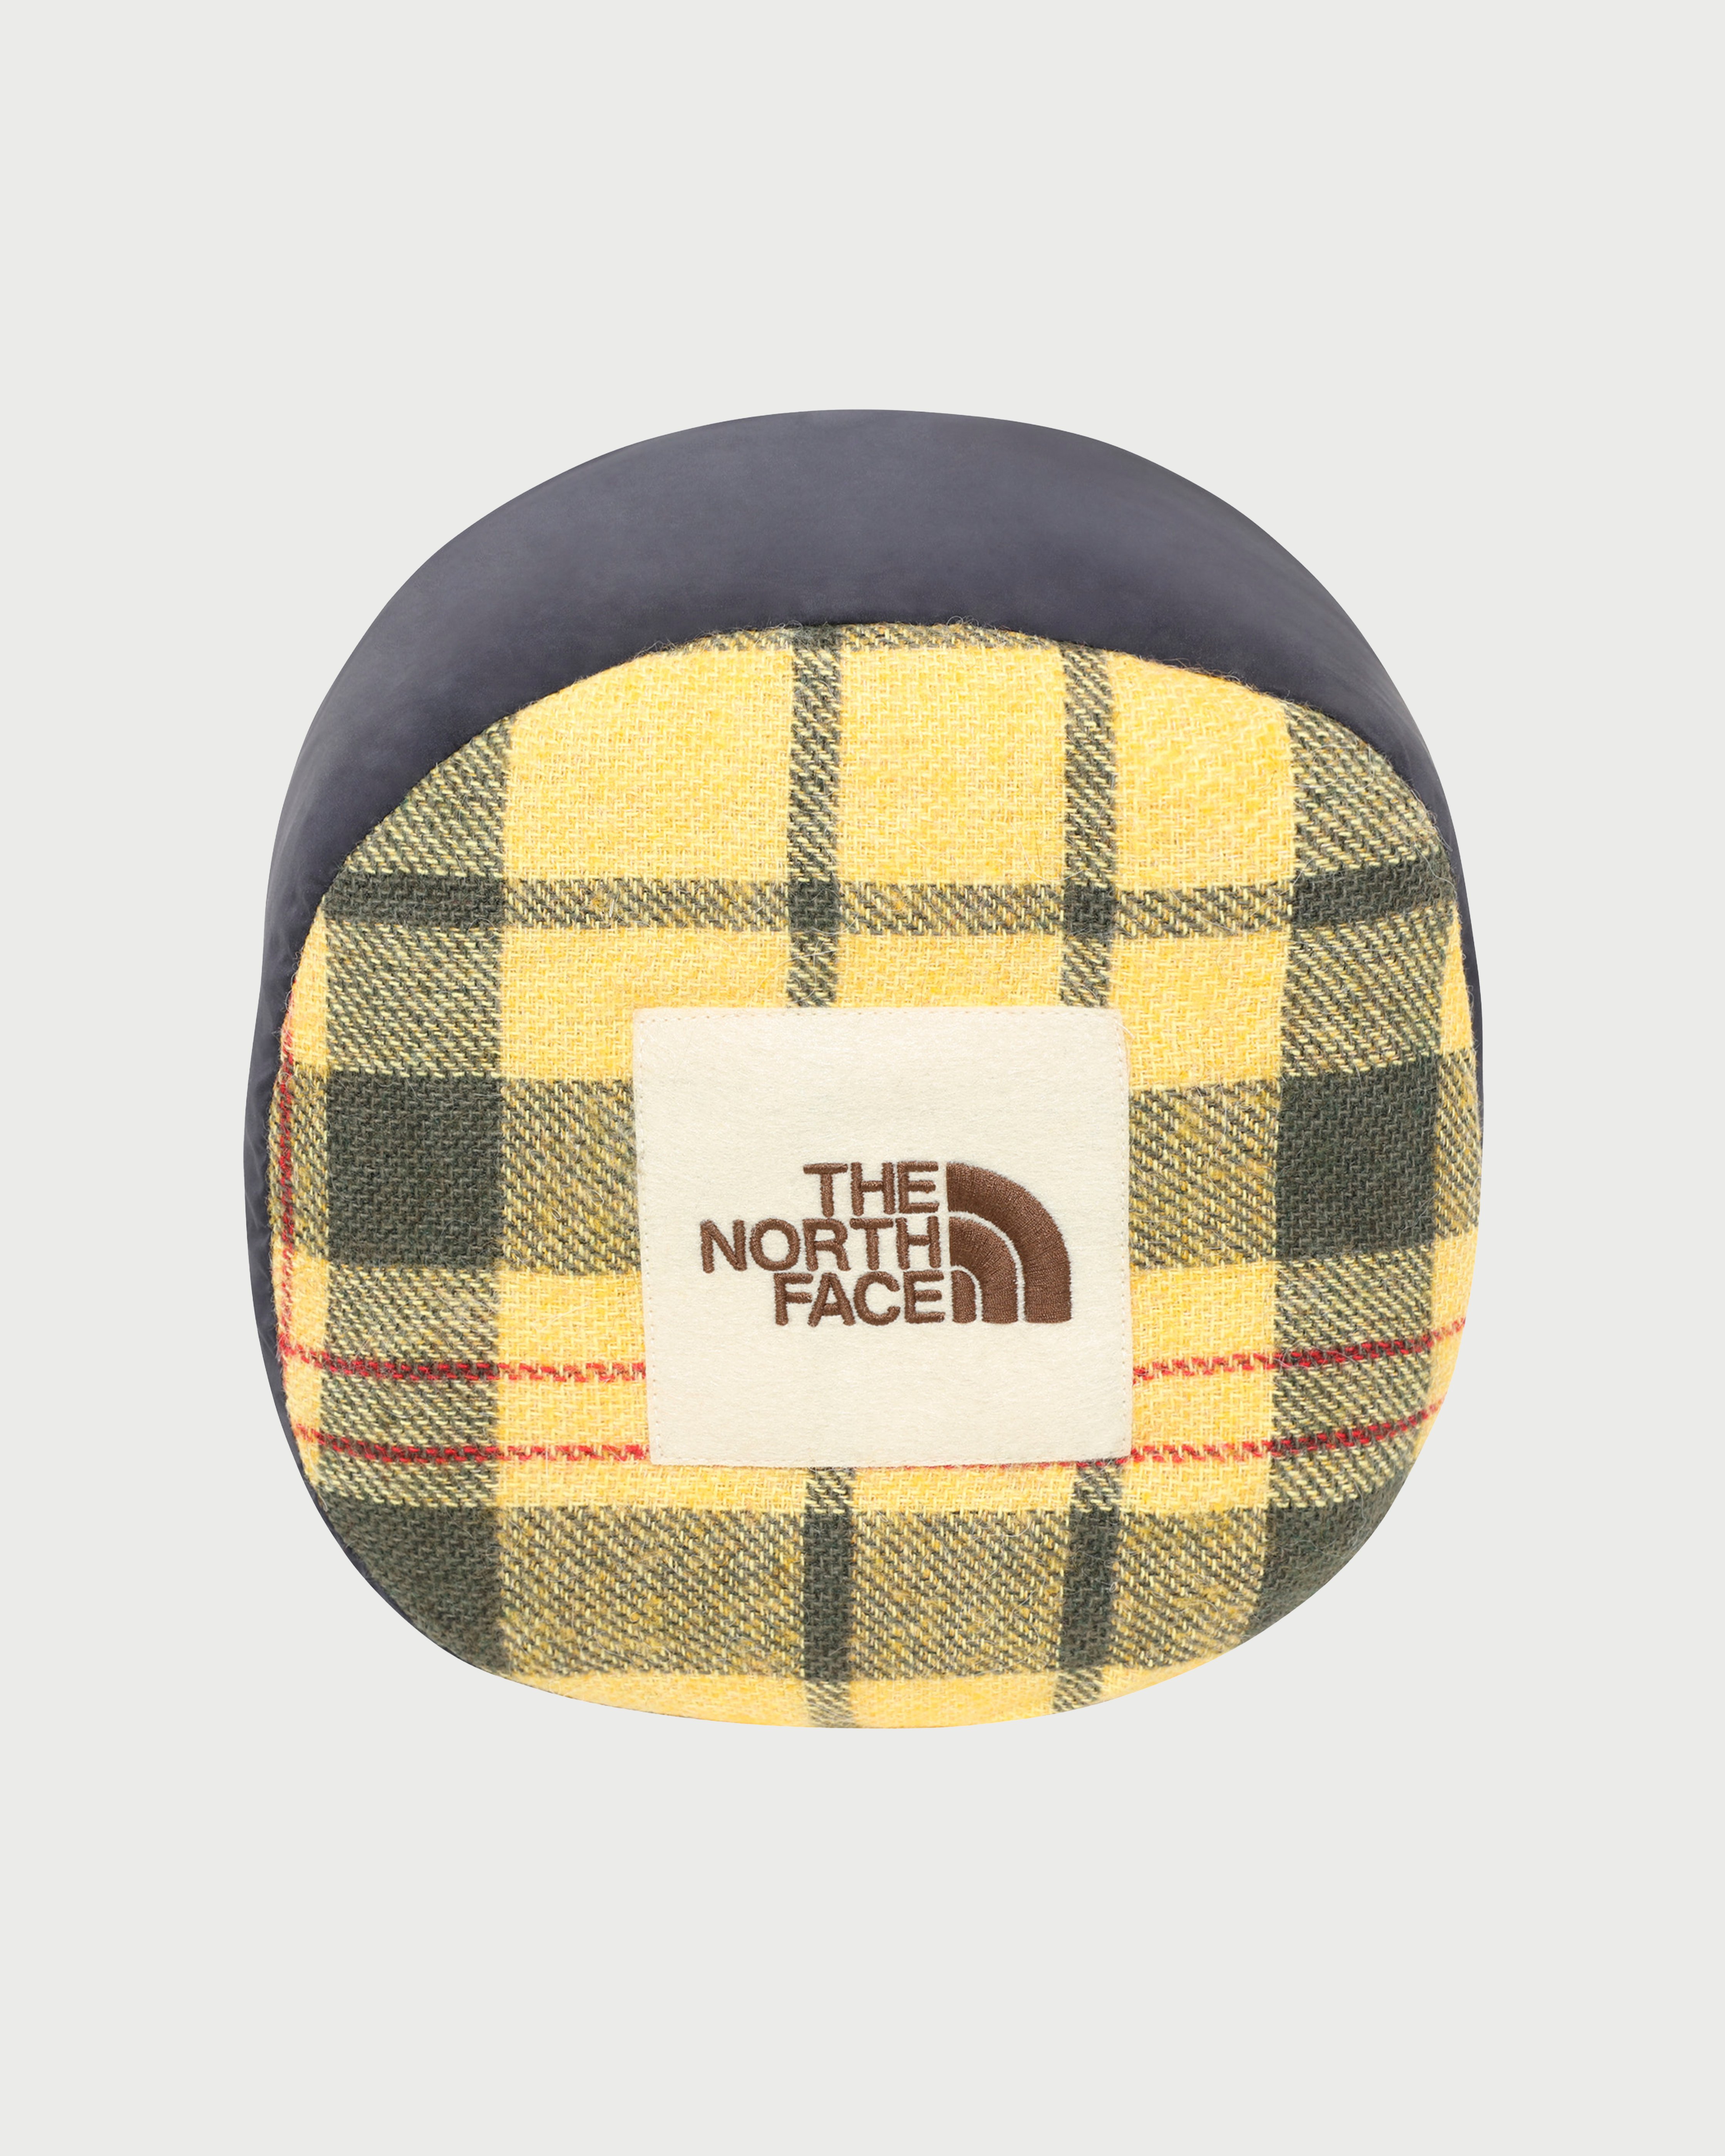 The North Face - Brown Label Insulated Scarf Summer Gold Heritage Unisex - Accessories - Yellow - Image 3